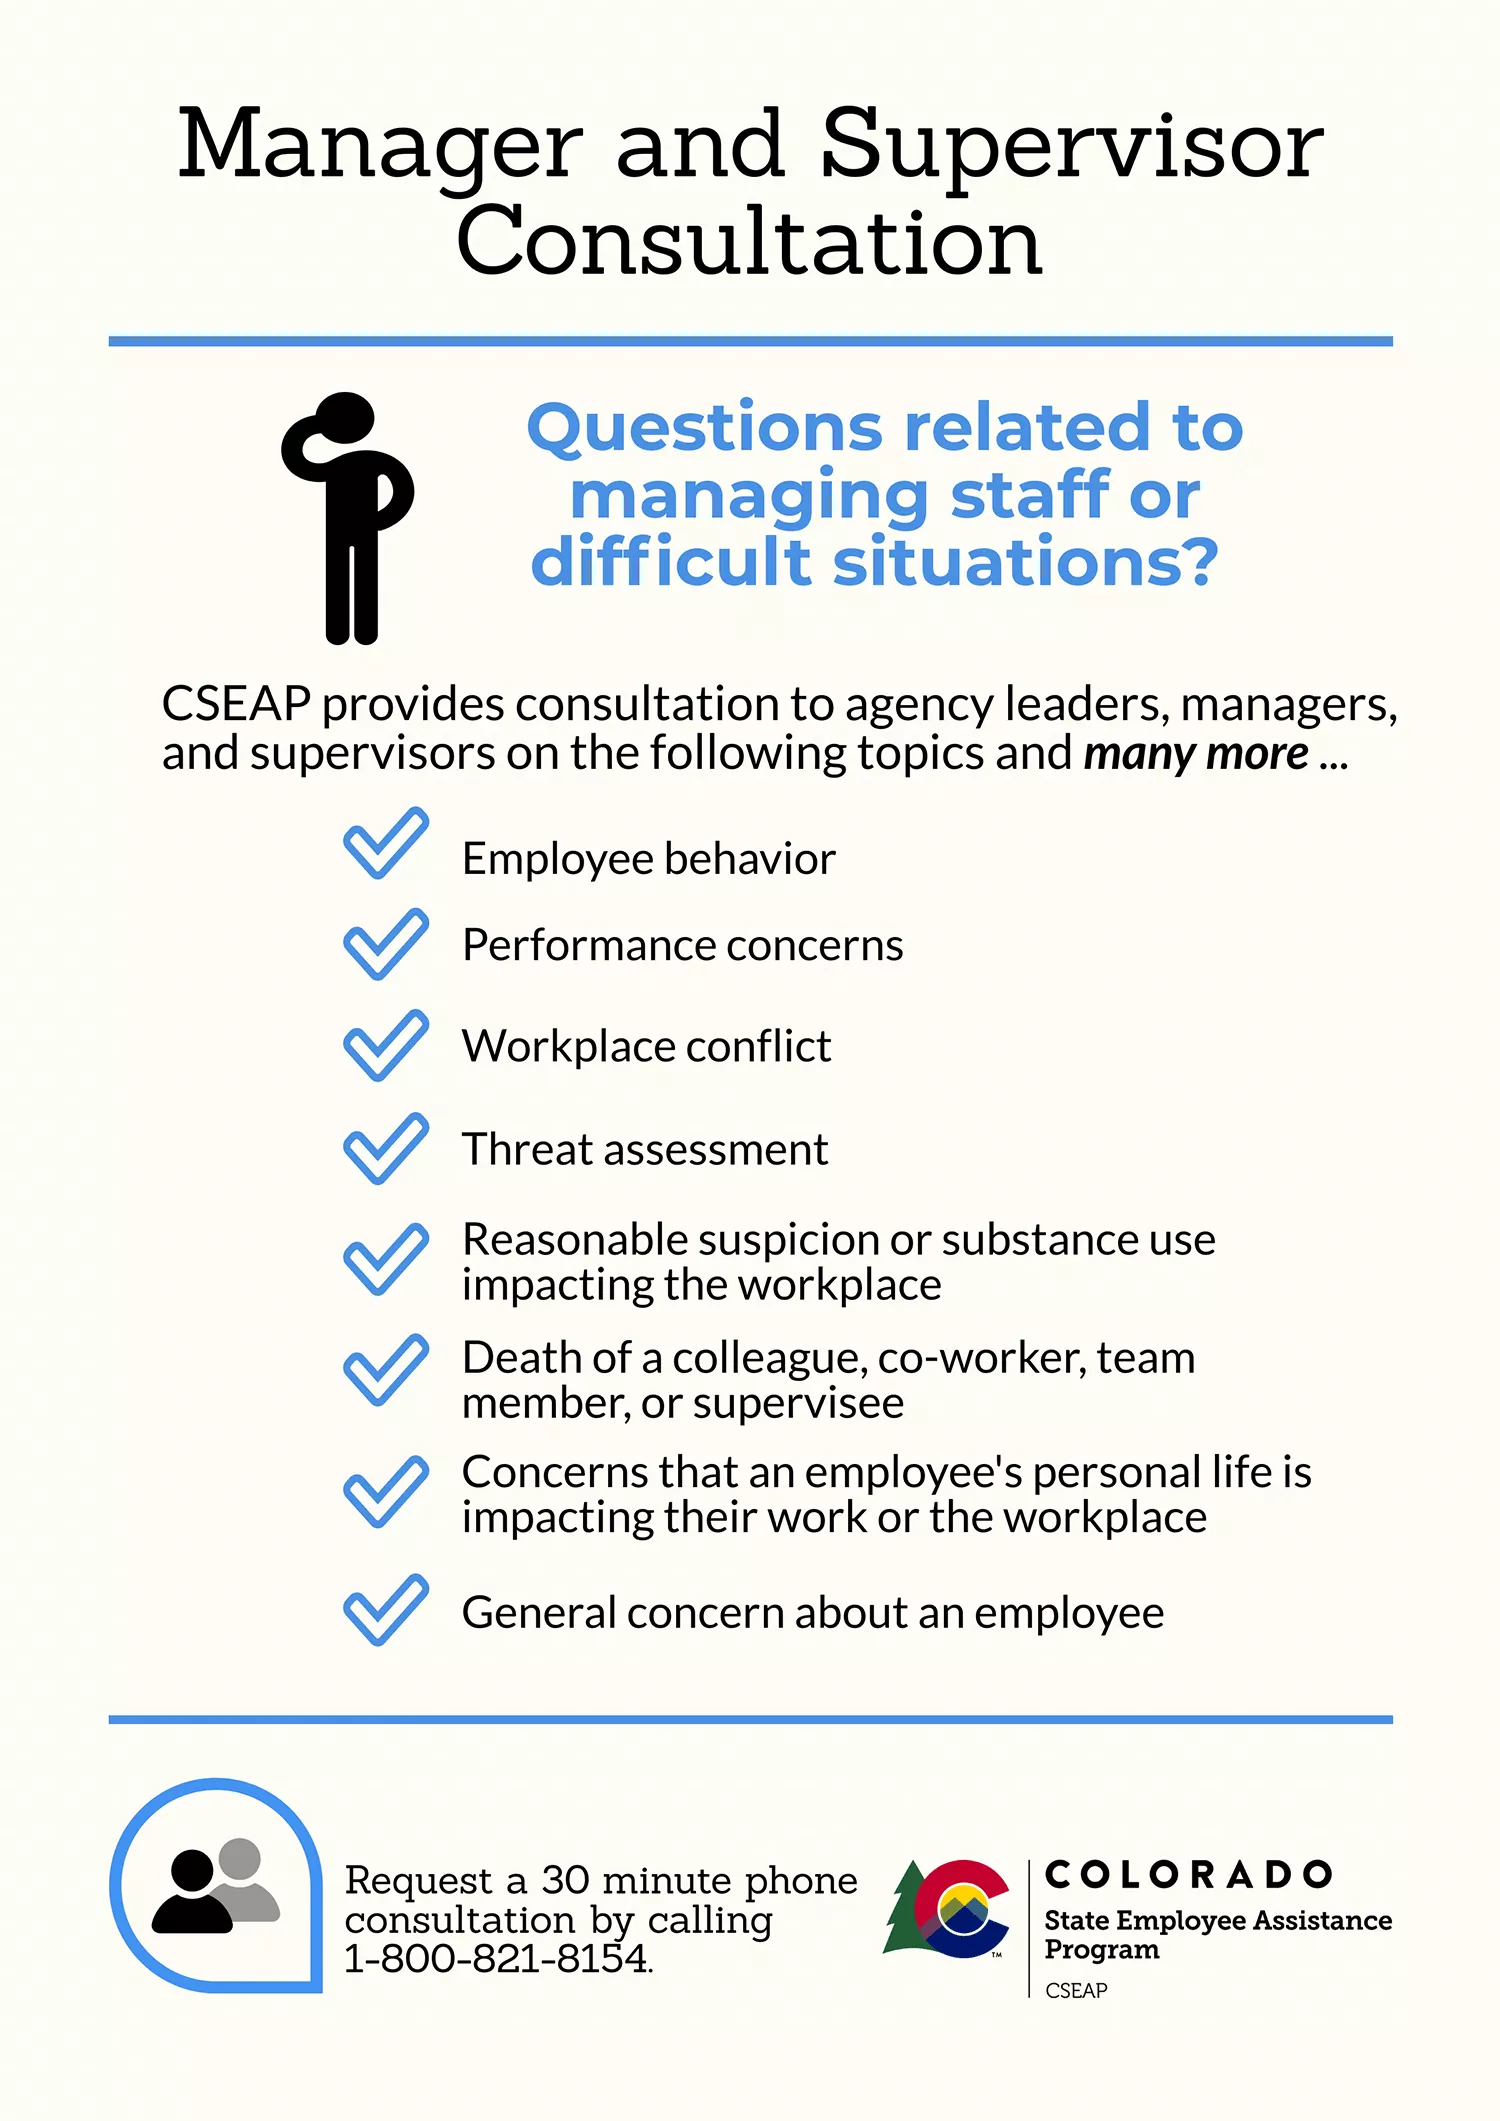 Infographic about manager and supervisor consultation